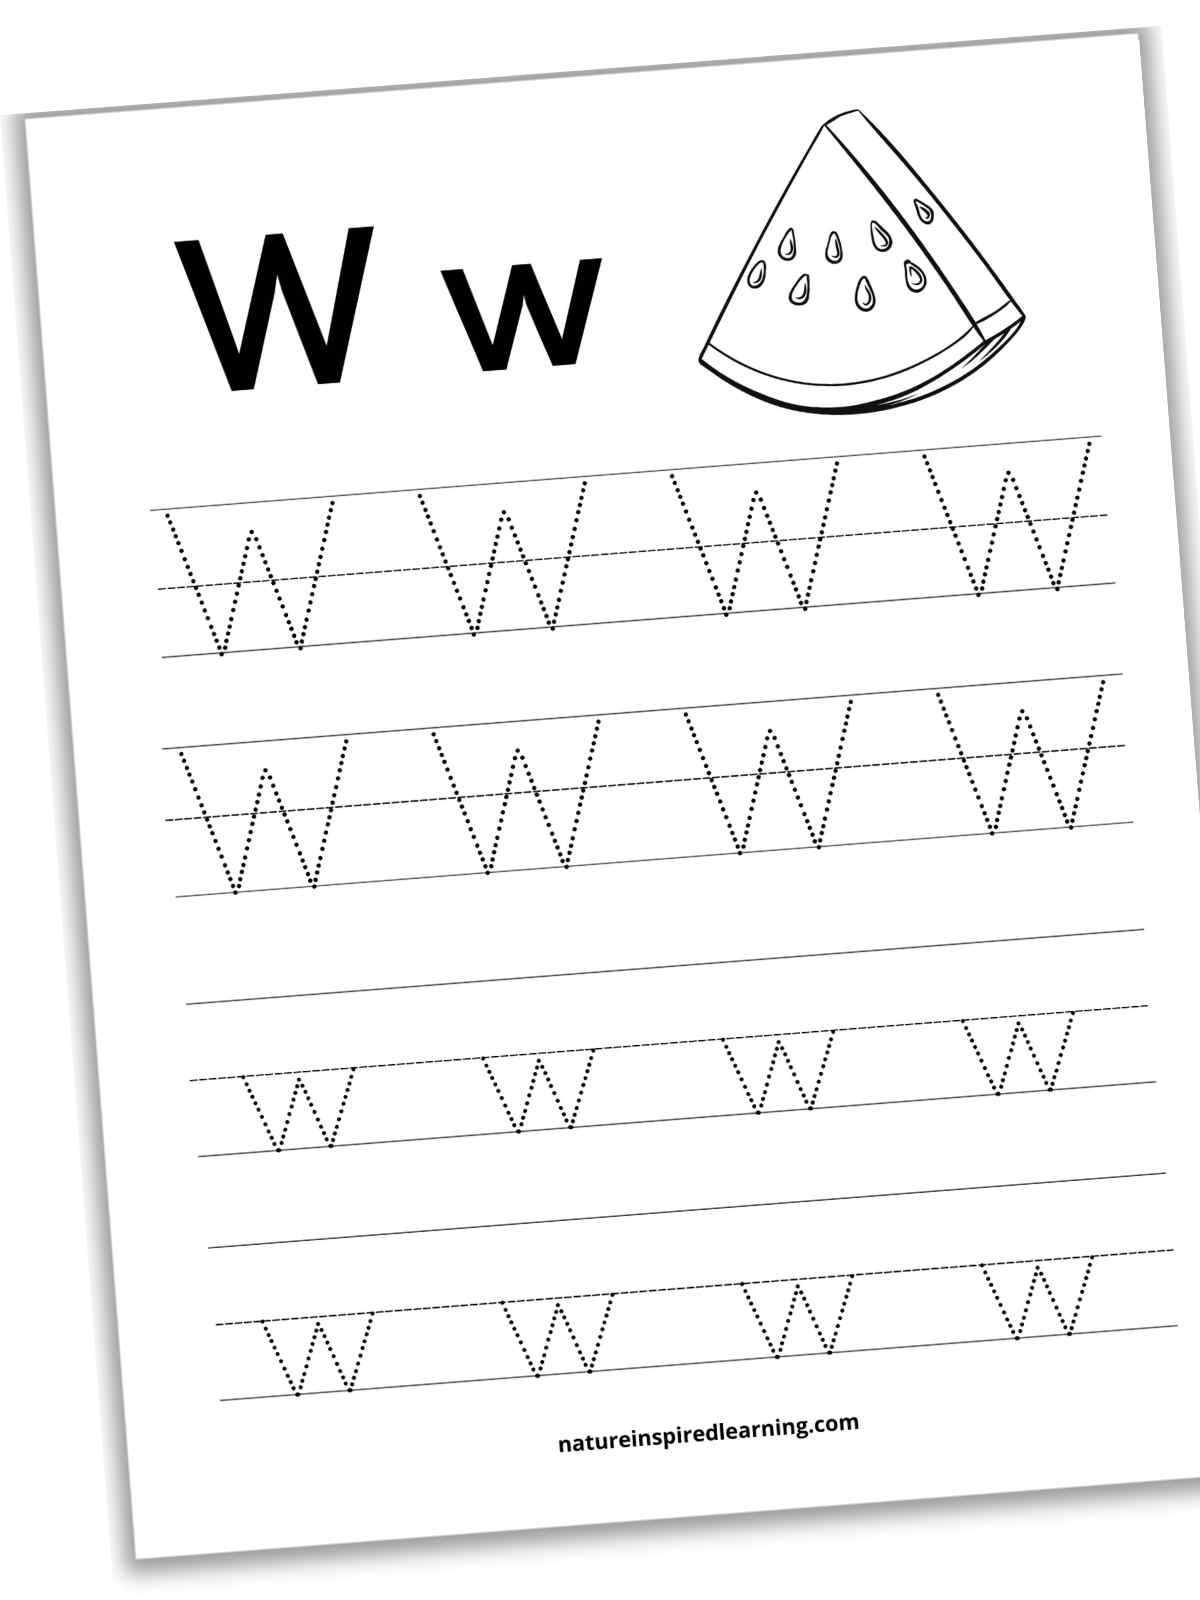 worksheet with four sets of lines two with capital W's and two with lowercase w's in dotted font. Black and white watermelon slice upper right